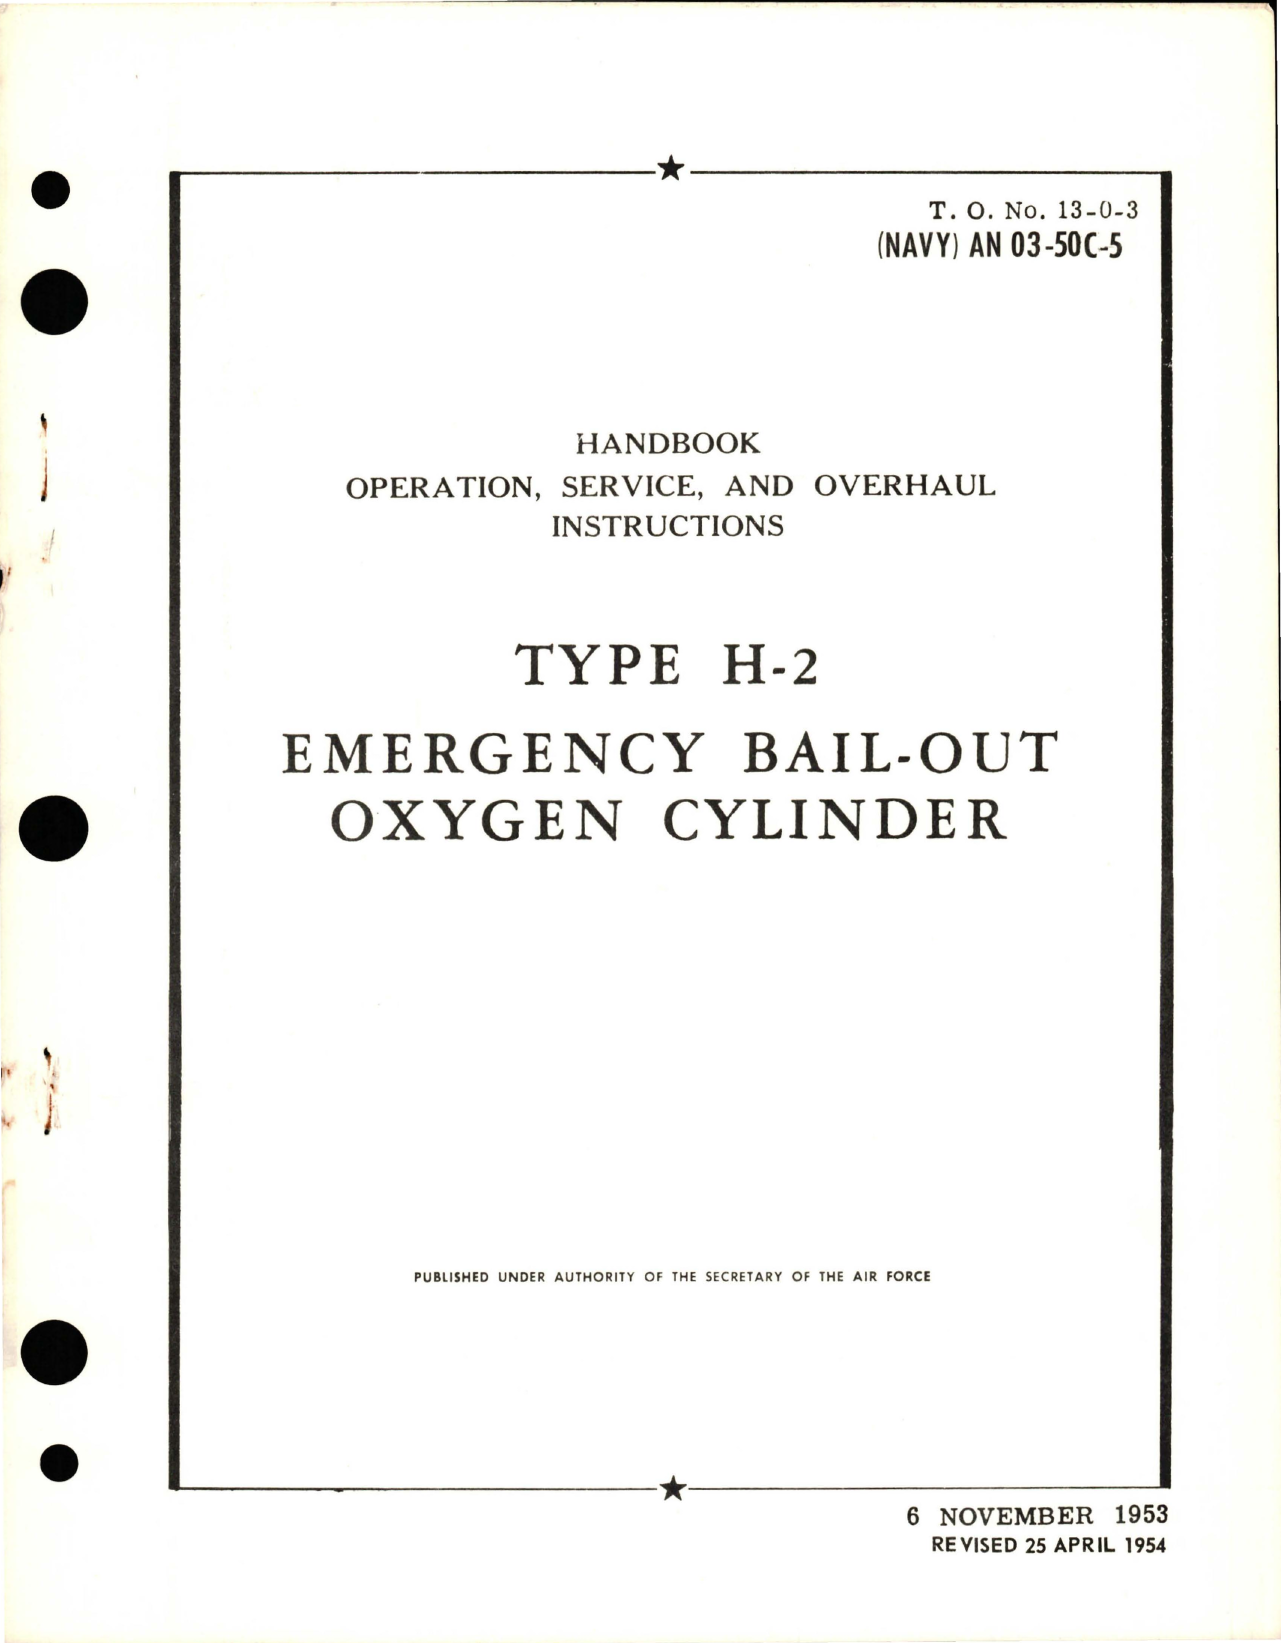 Sample page 1 from AirCorps Library document: Operation, Service, and Overhaul Instructions for Emergency Bail-Out Oxygen Cylinder - Type H-2